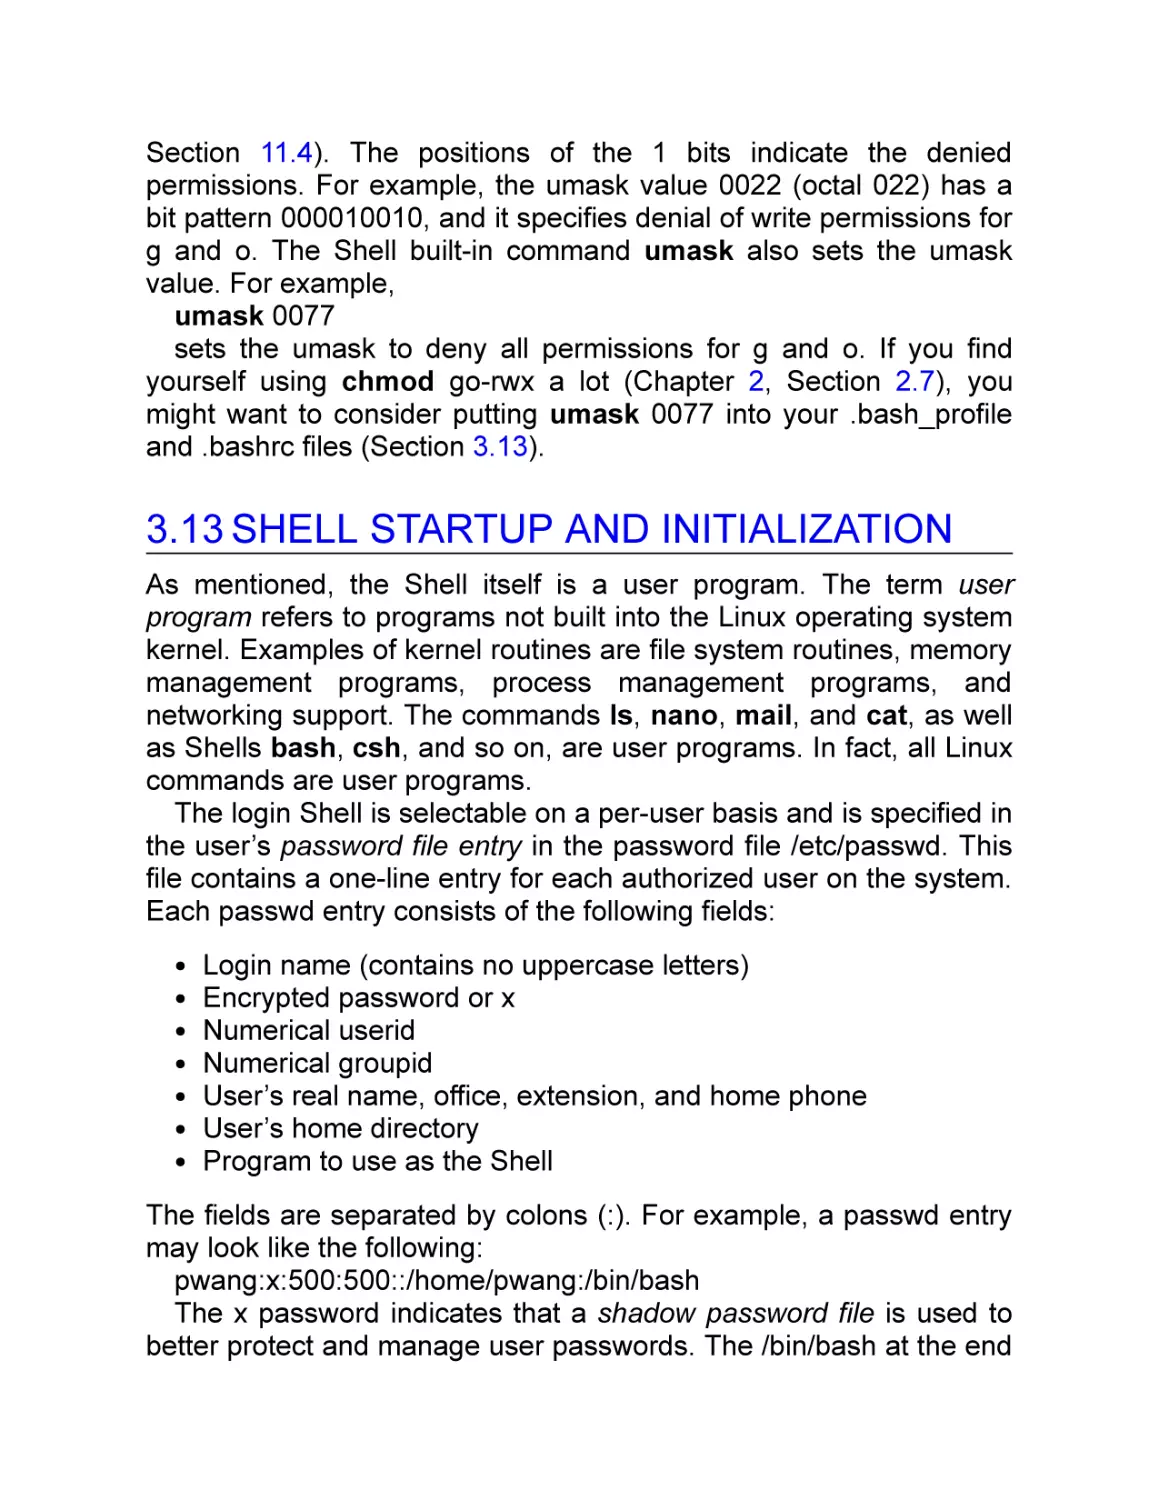 3.13 Shell Startup and Initialization